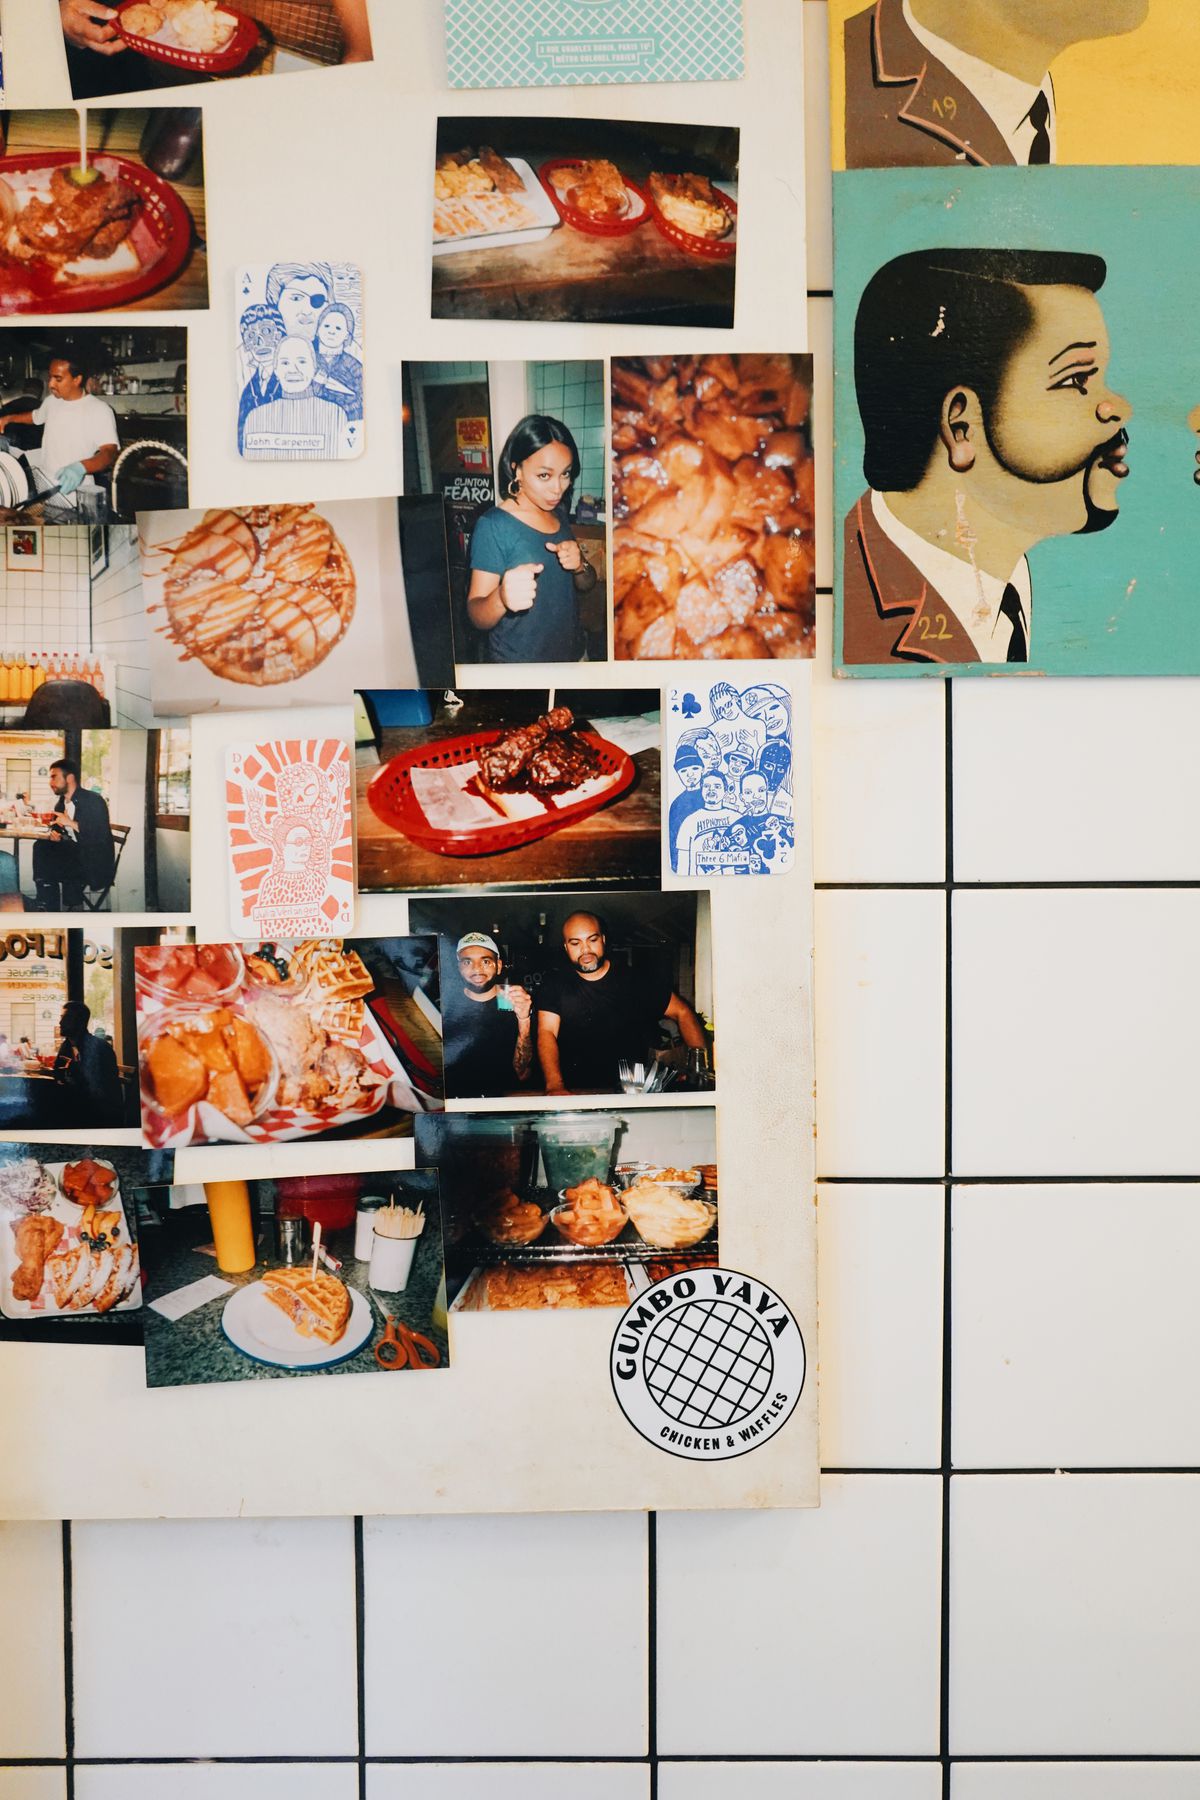 A close up of a colorful collection of photographs and drawings of people and food, all tacked up on a white tile wall inside Gumbo Yaya.